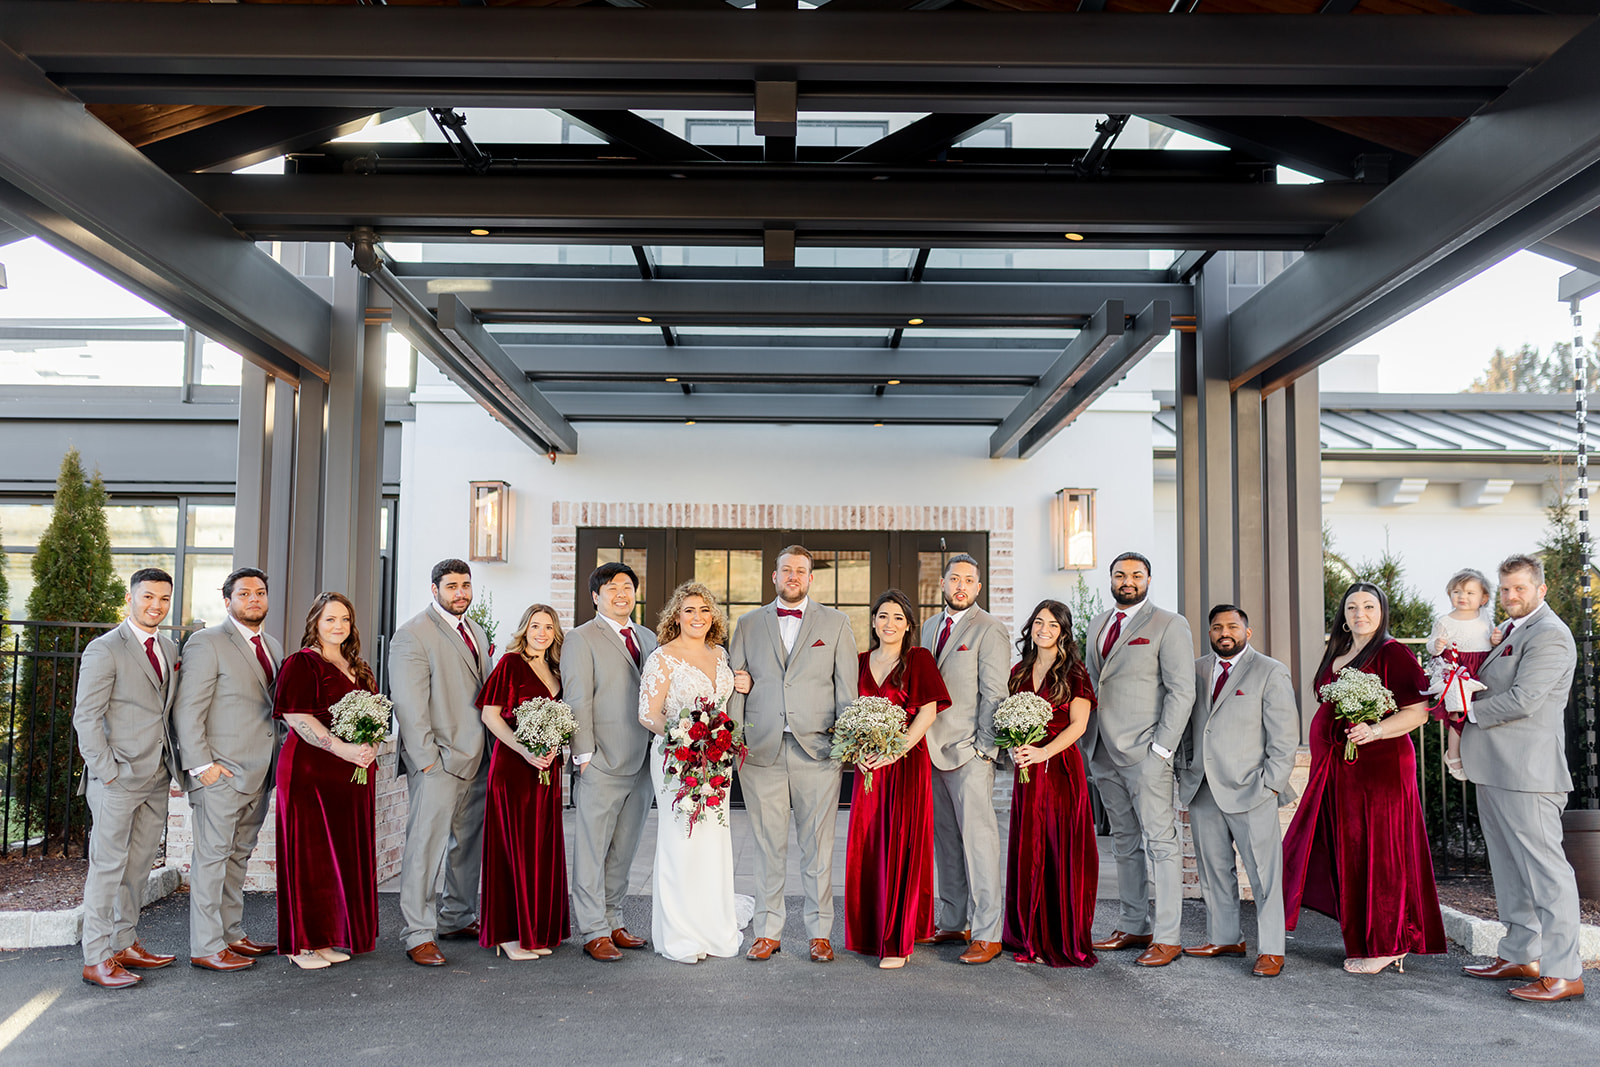 Newlyweds stand in line with their large wedding party under a covered driveway entrance